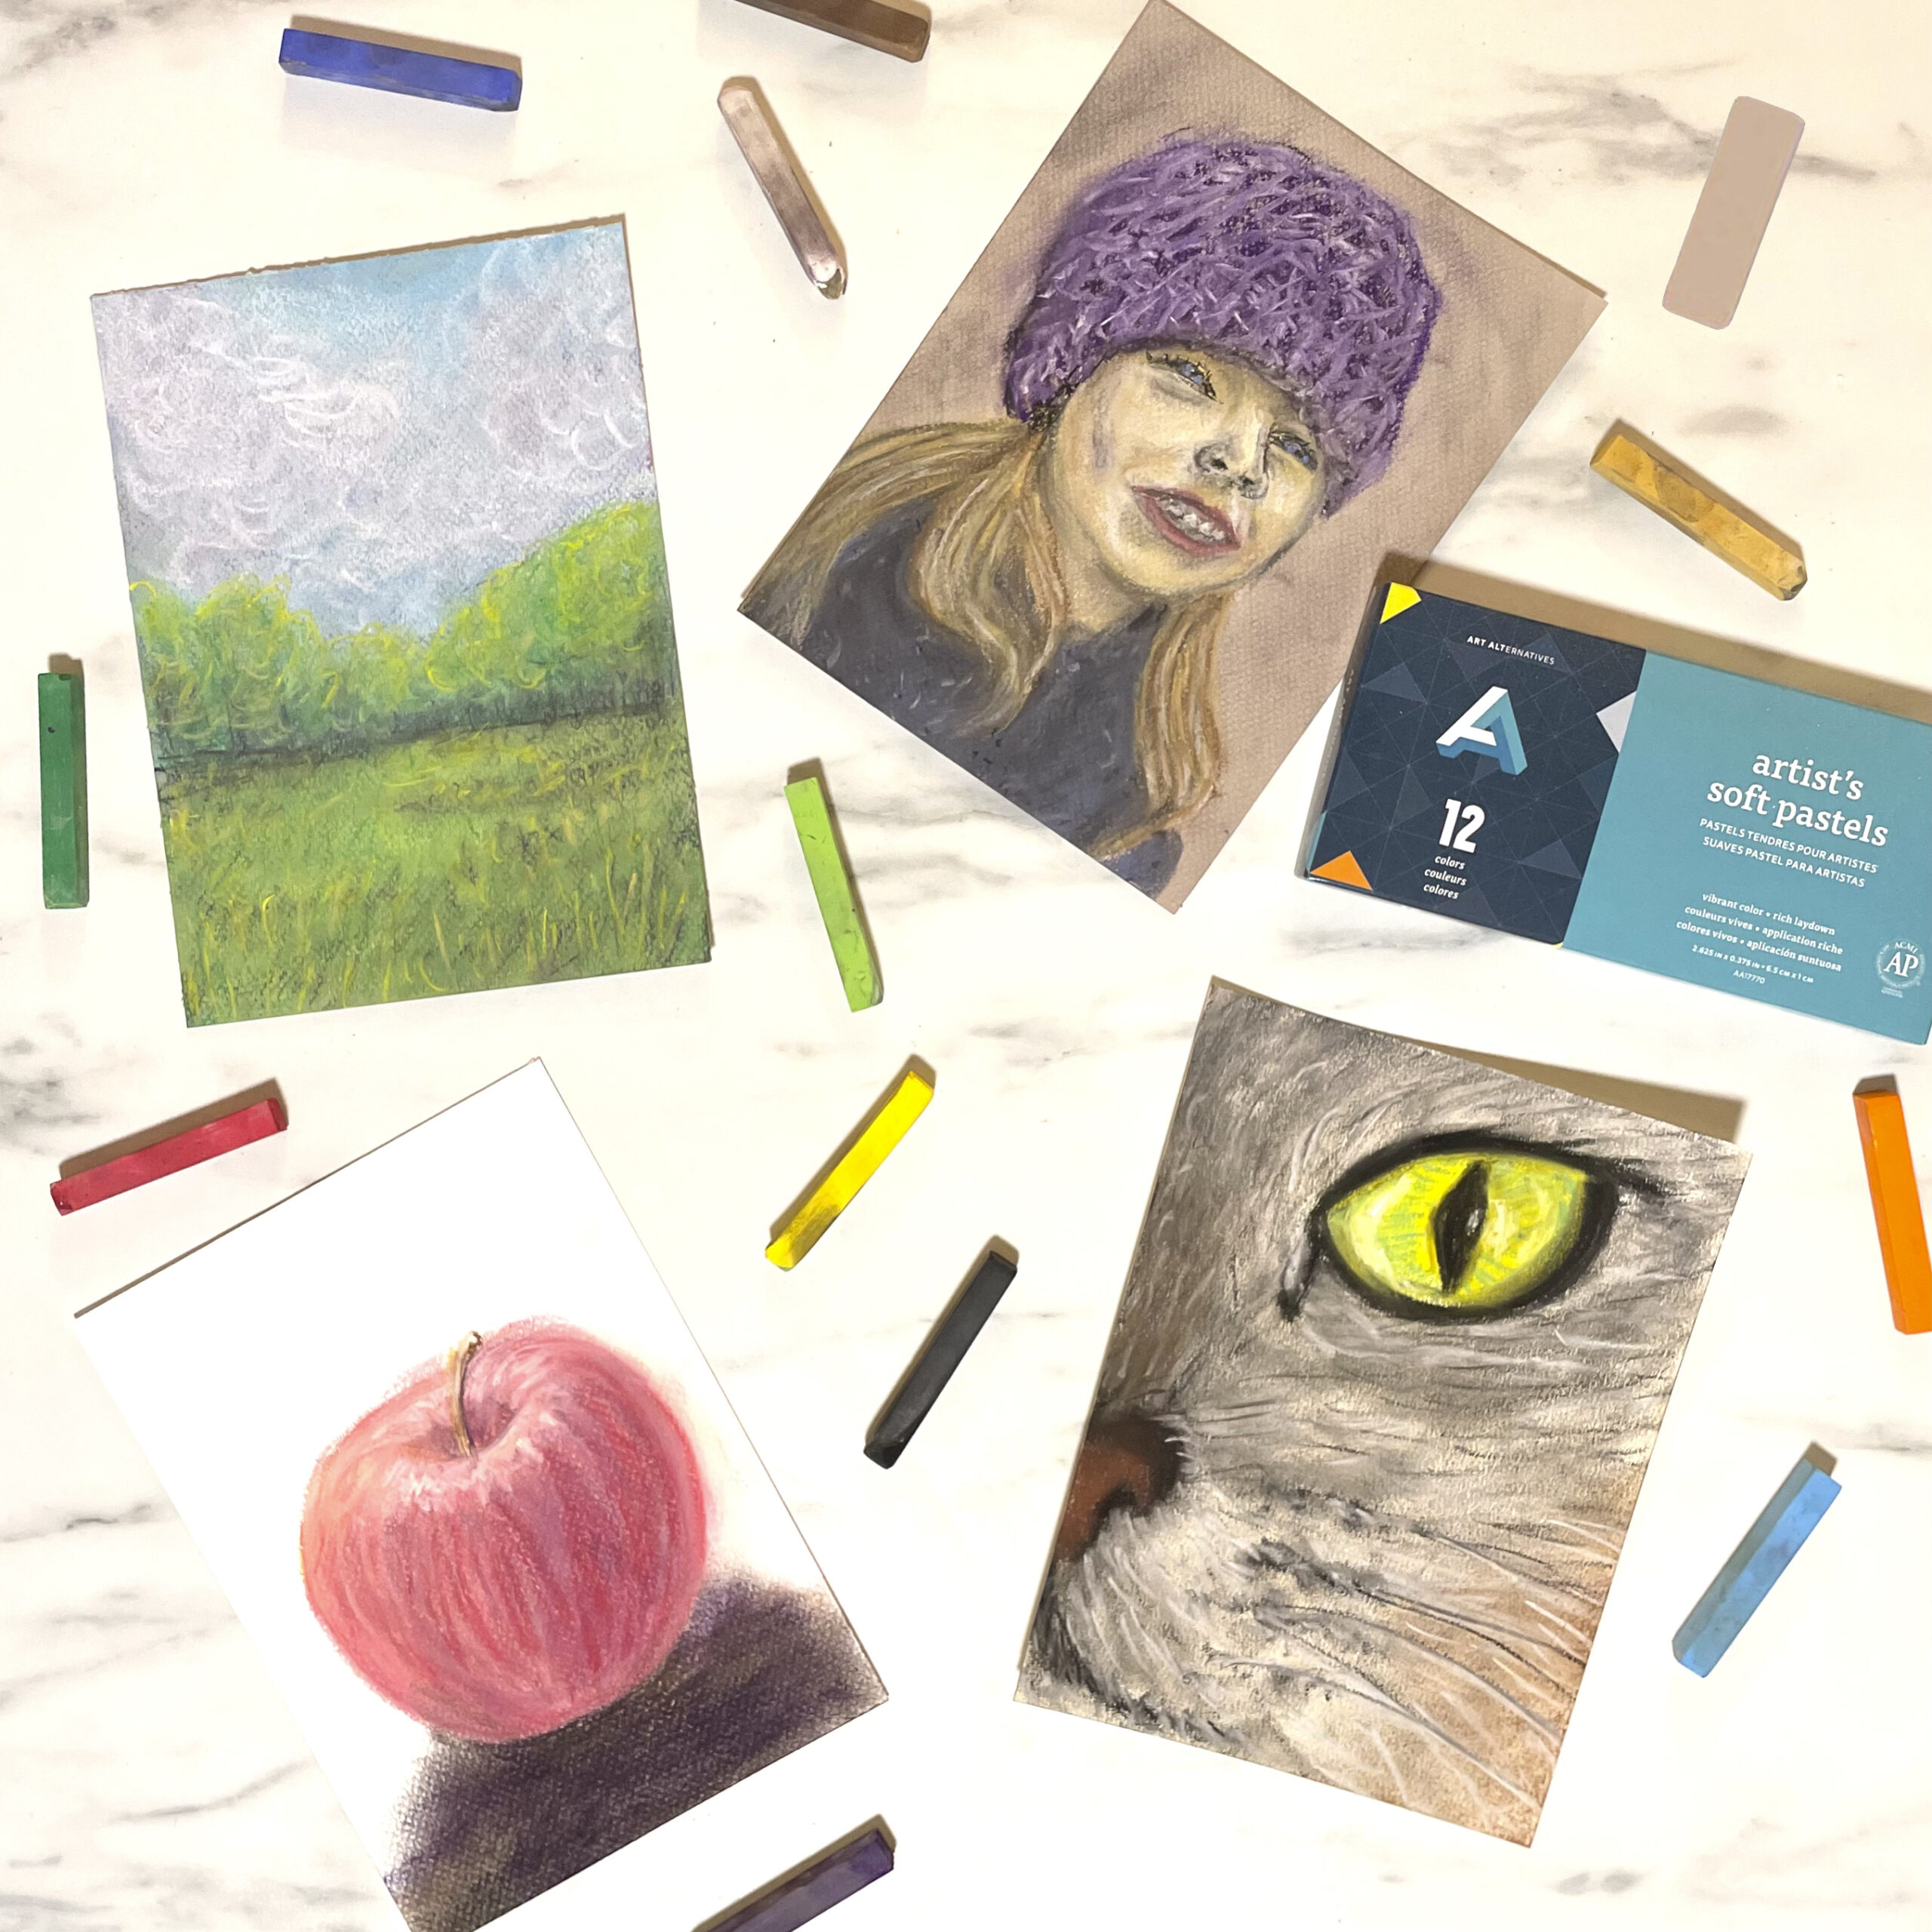 AS Artist's Loft Soft Pastels — CNY's #1 Art Classes! for Every SKILL Level  Painting & Drawing